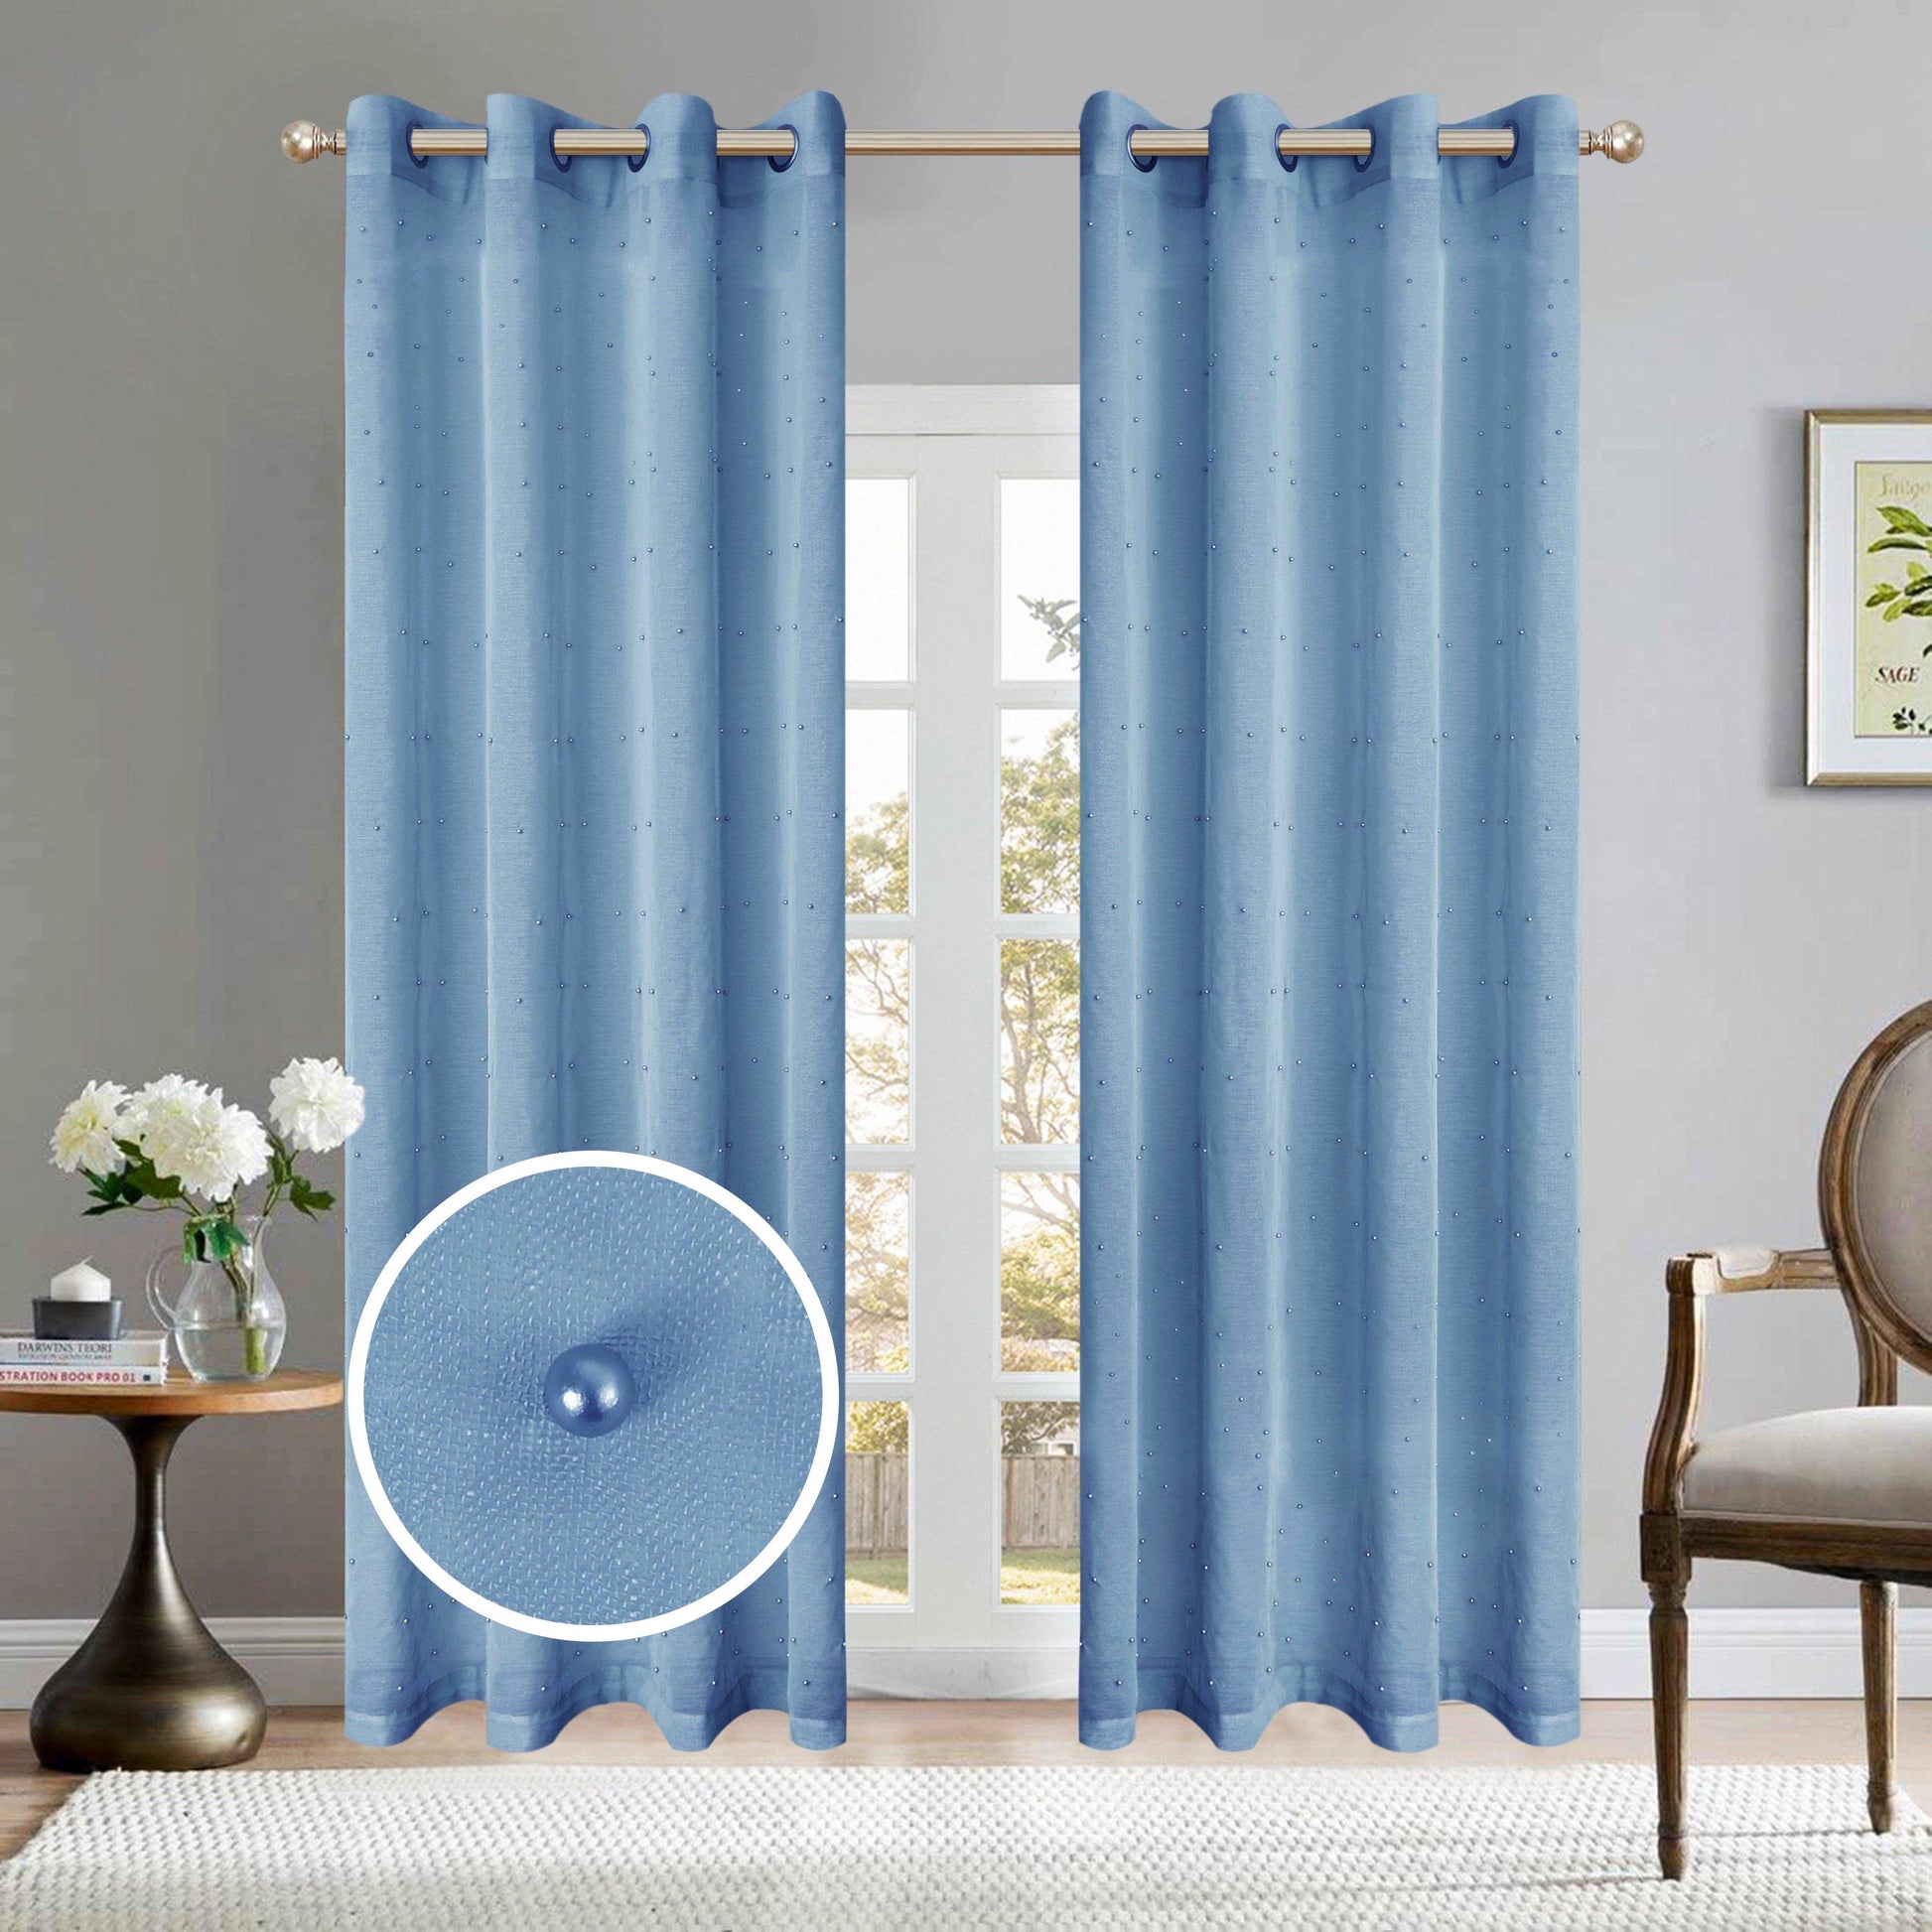 Linen World Teal “Pearl” Curtain Panel